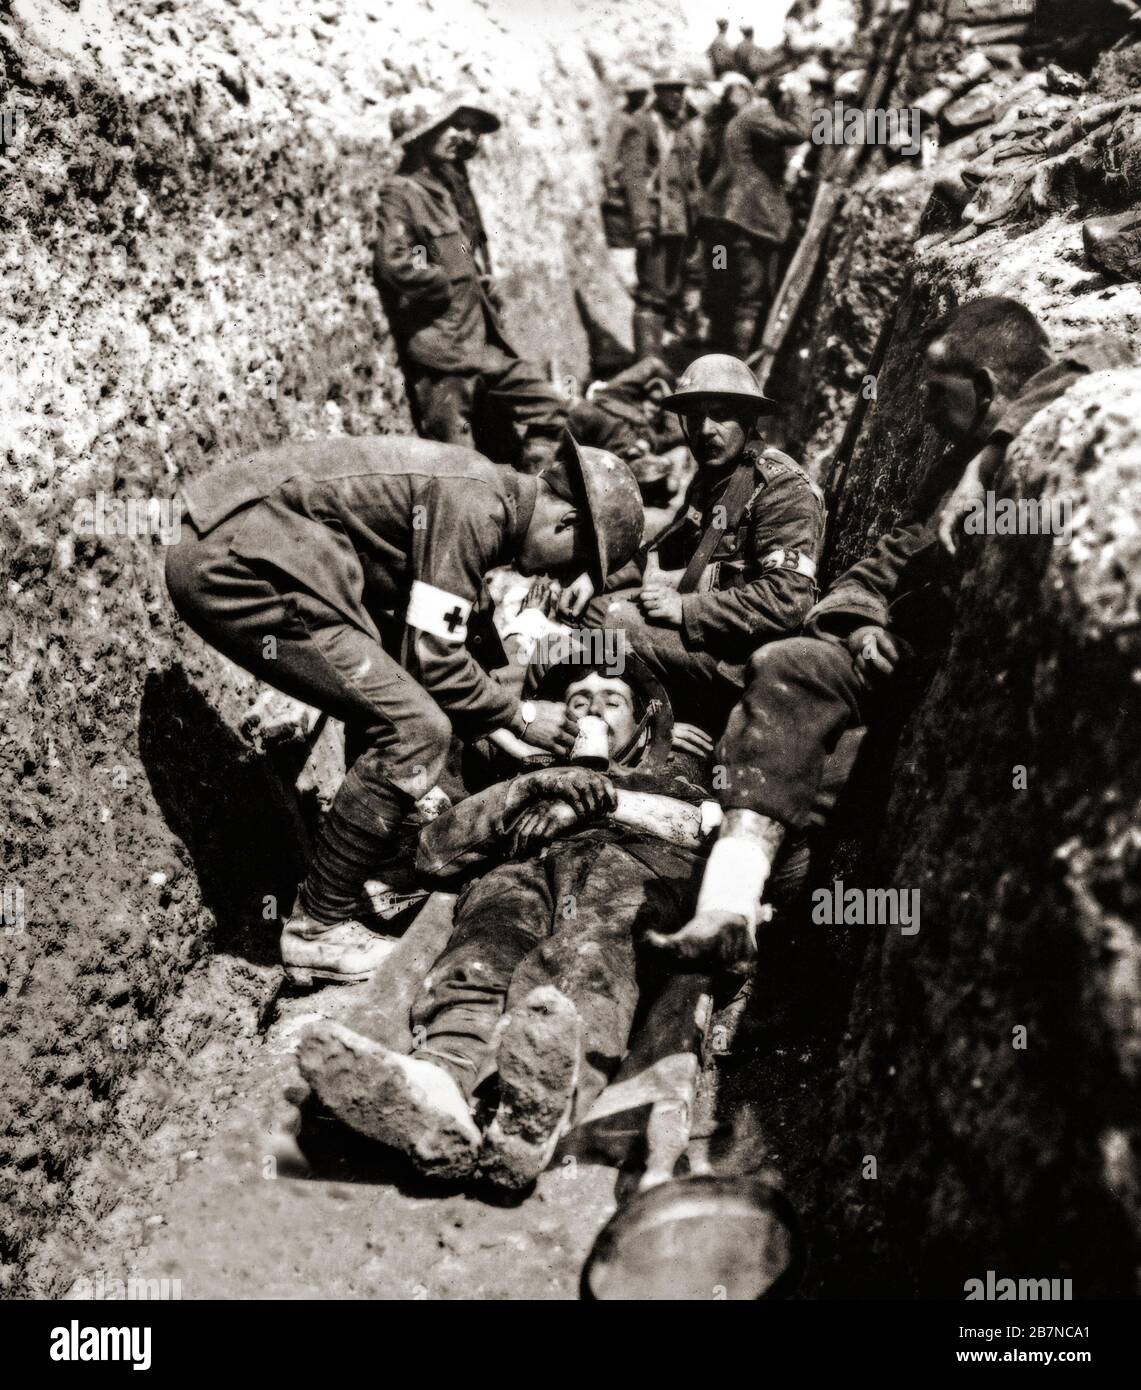 British stretcher bearers giving aid to a wounded soldier during the Battle of the Somme also known as the Somme Offensive, that took place between 1 July and 18 November 1916 on both sides of the upper reaches of the River Somme in France. Stock Photo